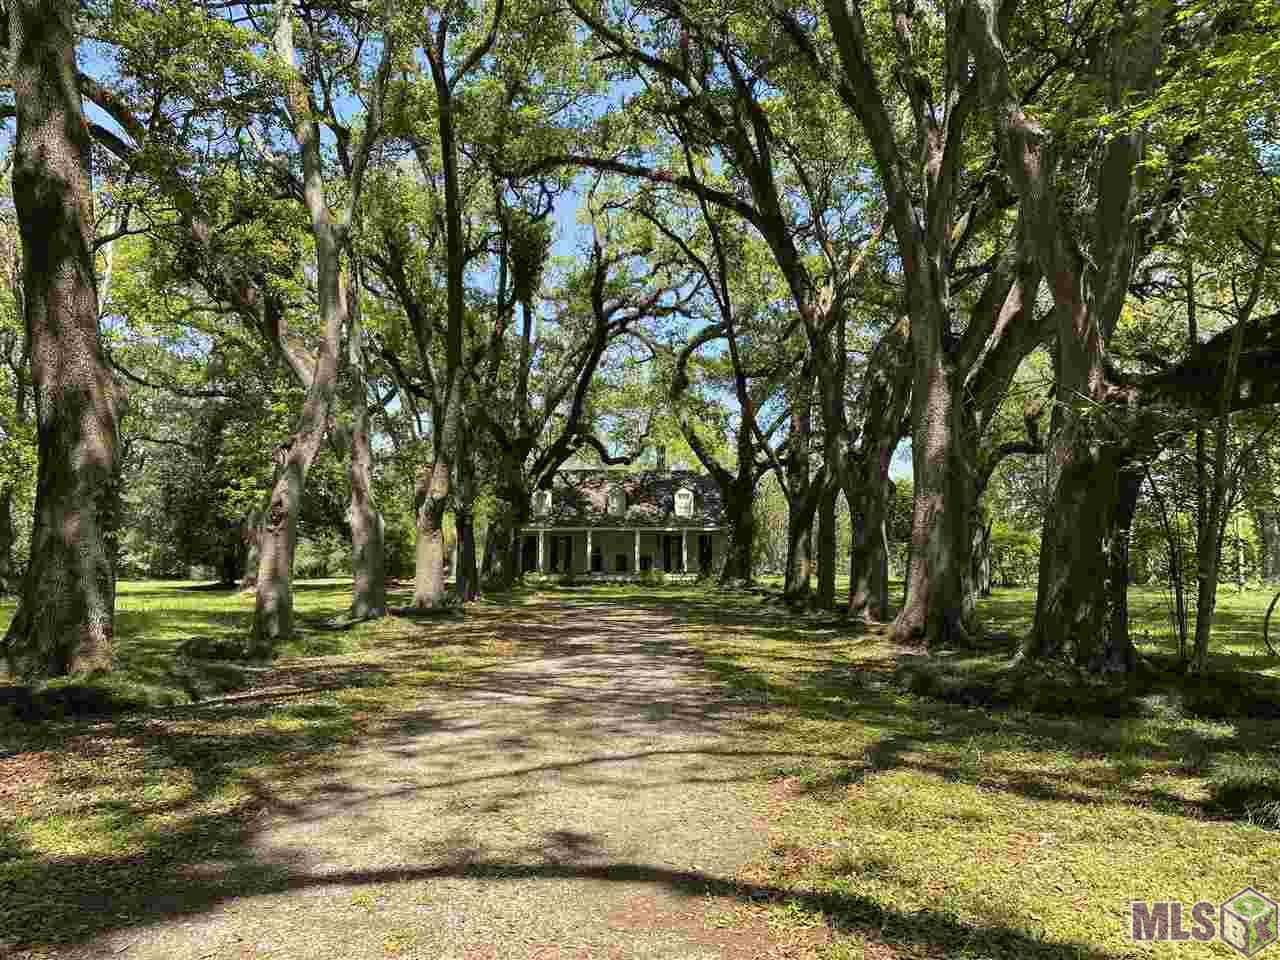 Own a piece of Baton Rouge history on Highland Road just south of LSU! Previously known as “The Oaks,” this 6.18 acre property presents the right buyer with a rare opportunity to acquire acreage with Centennial Oaks along the historic Highland Road corridor, not far from the south gates of LSU.  Gorgeous live oaks shade the driveway leading up to the home which has been owned by the Duplantier family since the early 1800’s. The live oaks provide a beautiful frame for the 4,034 square foot, two-story home, built more than 170 years ago. The elevated front porch has operating shutters separated by three tall windows in the center. Six square columns stand sentinel below three dormers on the roof. Formal dining room. The home’s original woodburning fireplace is below the original brick chimney in the downstairs living room, while the large kitchen had been updated several years ago with a Chambers electric cooktop and double wall ovens. The kitchen also has an abundance of cabinetry, dishwasher and double sink below large windows that view the side yard. The master suite has a walk-in closet and sitting area, while an additional two bedrooms with ceiling fans and a hall bath are located upstairs. The home also has a double garage and an inside laundry room. This is truly a rare opportunity to obtain one of Baton Rouge’s most familiar landmarks on Highland Road. The bonus is six-plus acres along one of the most desirable residential locations in the city. Call today if you’d like to see this amazing, historical Highland Road property!